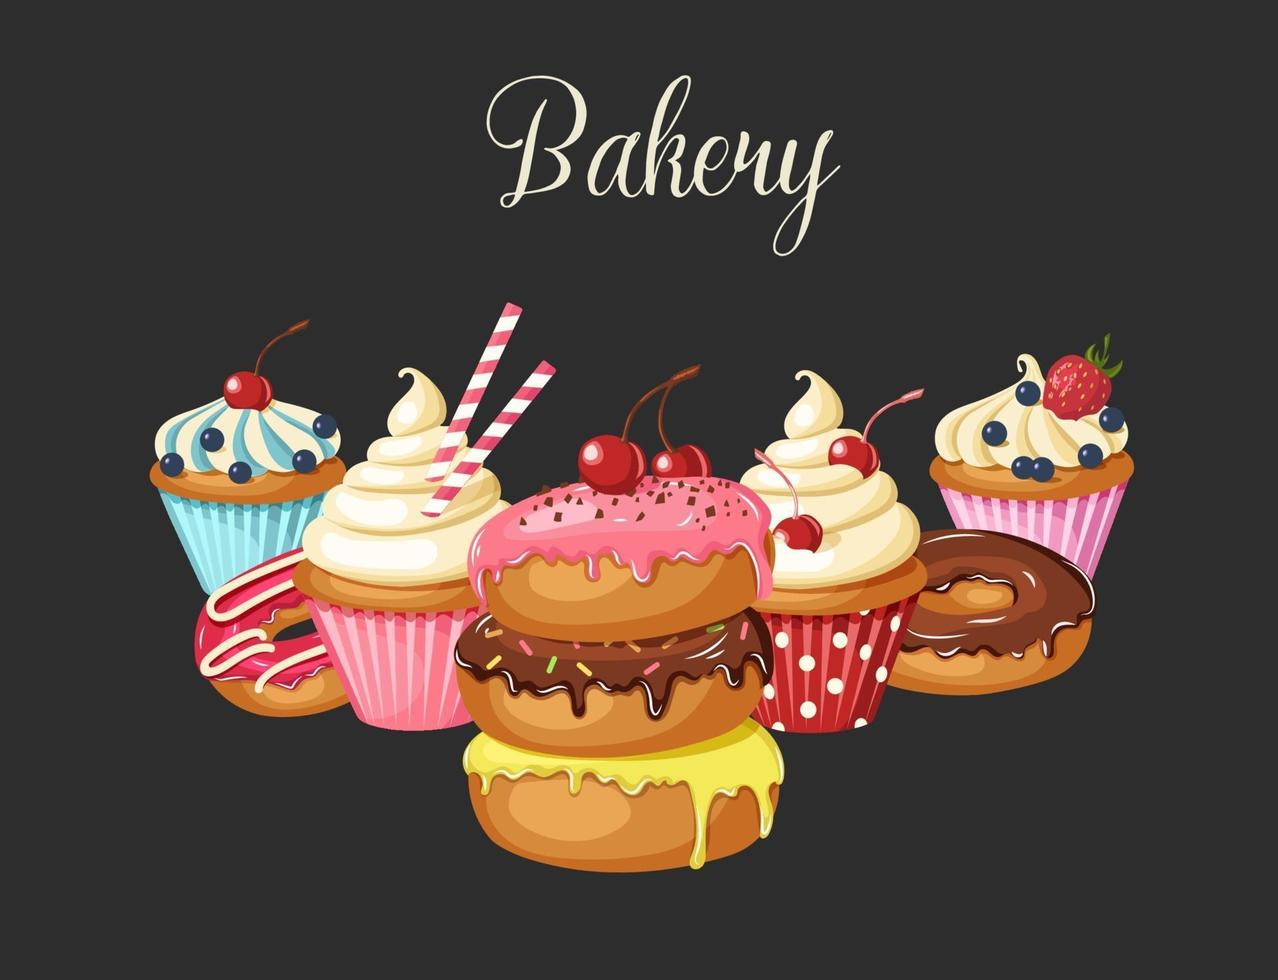 Sweet Bakery background with glazed donuts, cheesecake and cupcakes with cherry, strawberries and blueberries. Hand made lettering. Desert for menu. Food design. vector